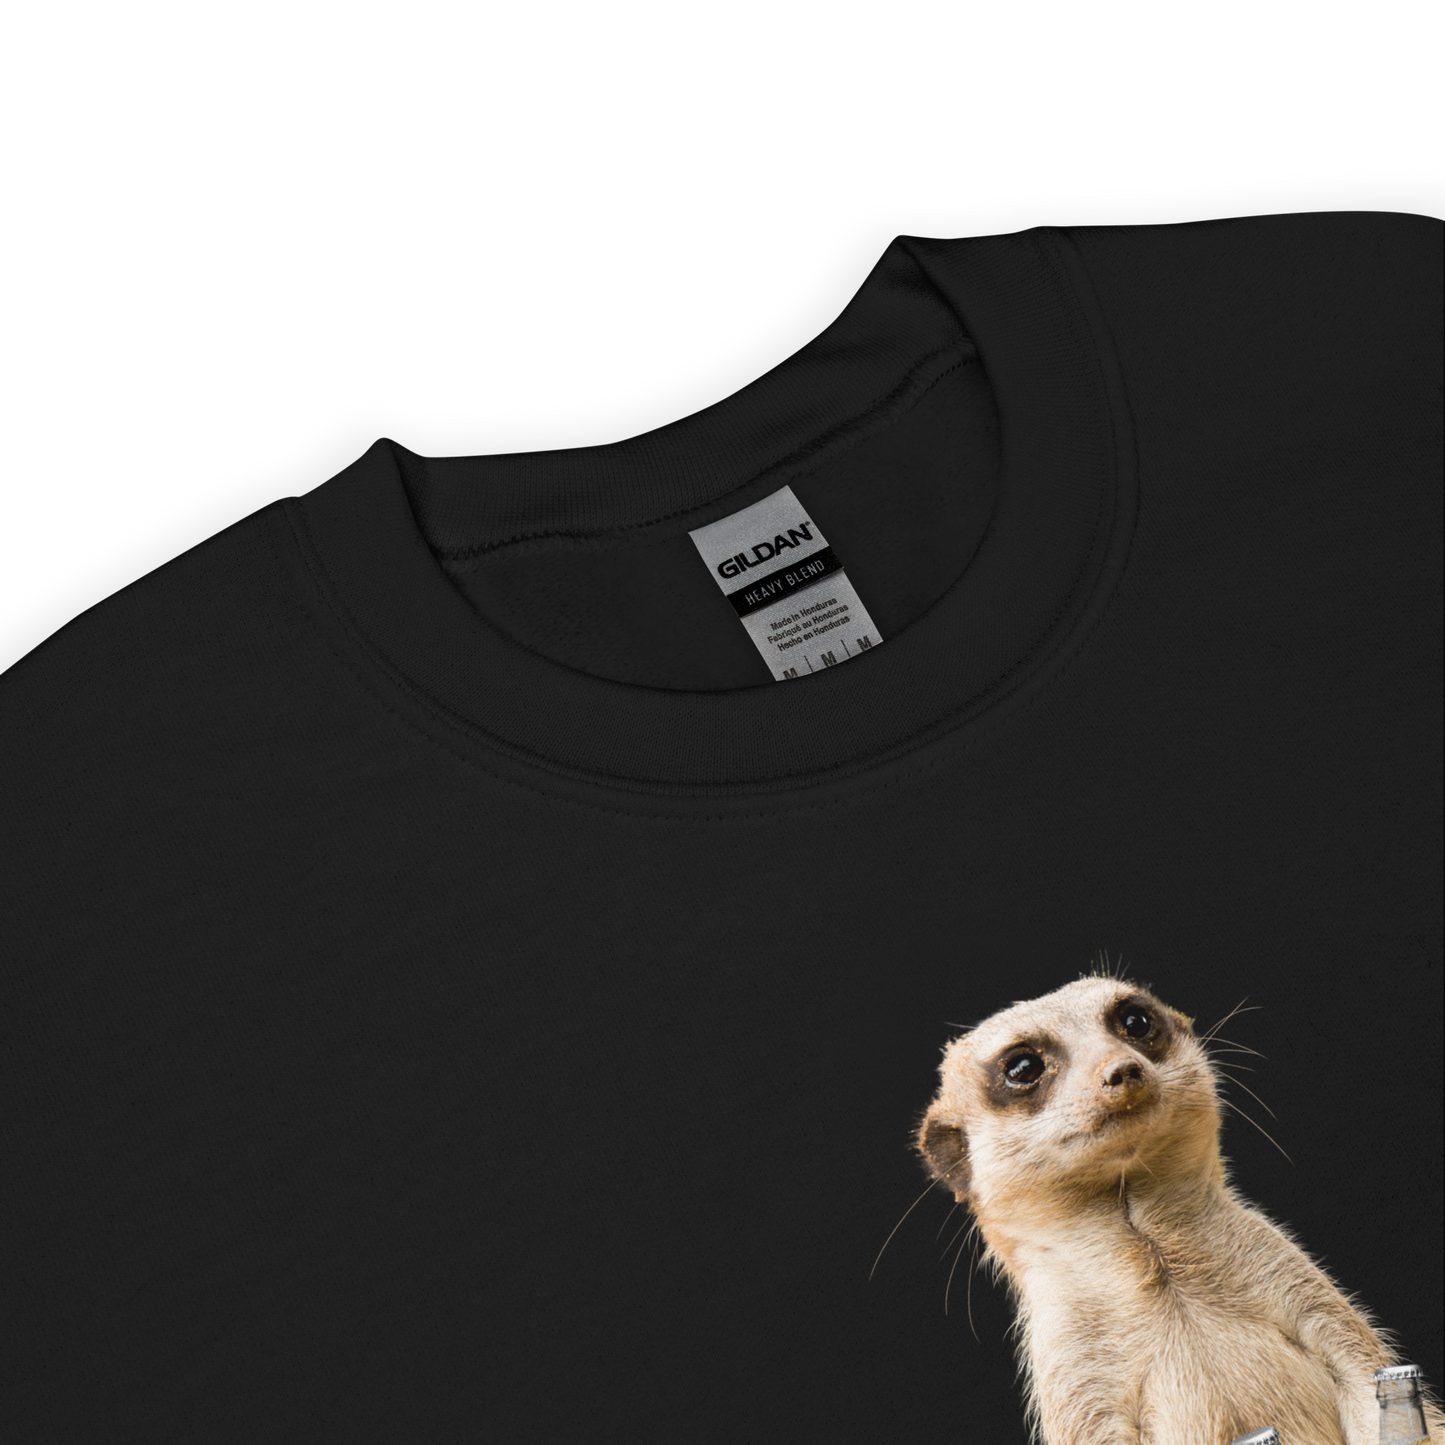 Product Details of a Black Meerkat Sweatshirt featuring a hilarious Beerkat graphic on the chest - Funny Graphic Meerkat Sweatshirts - Boozy Fox